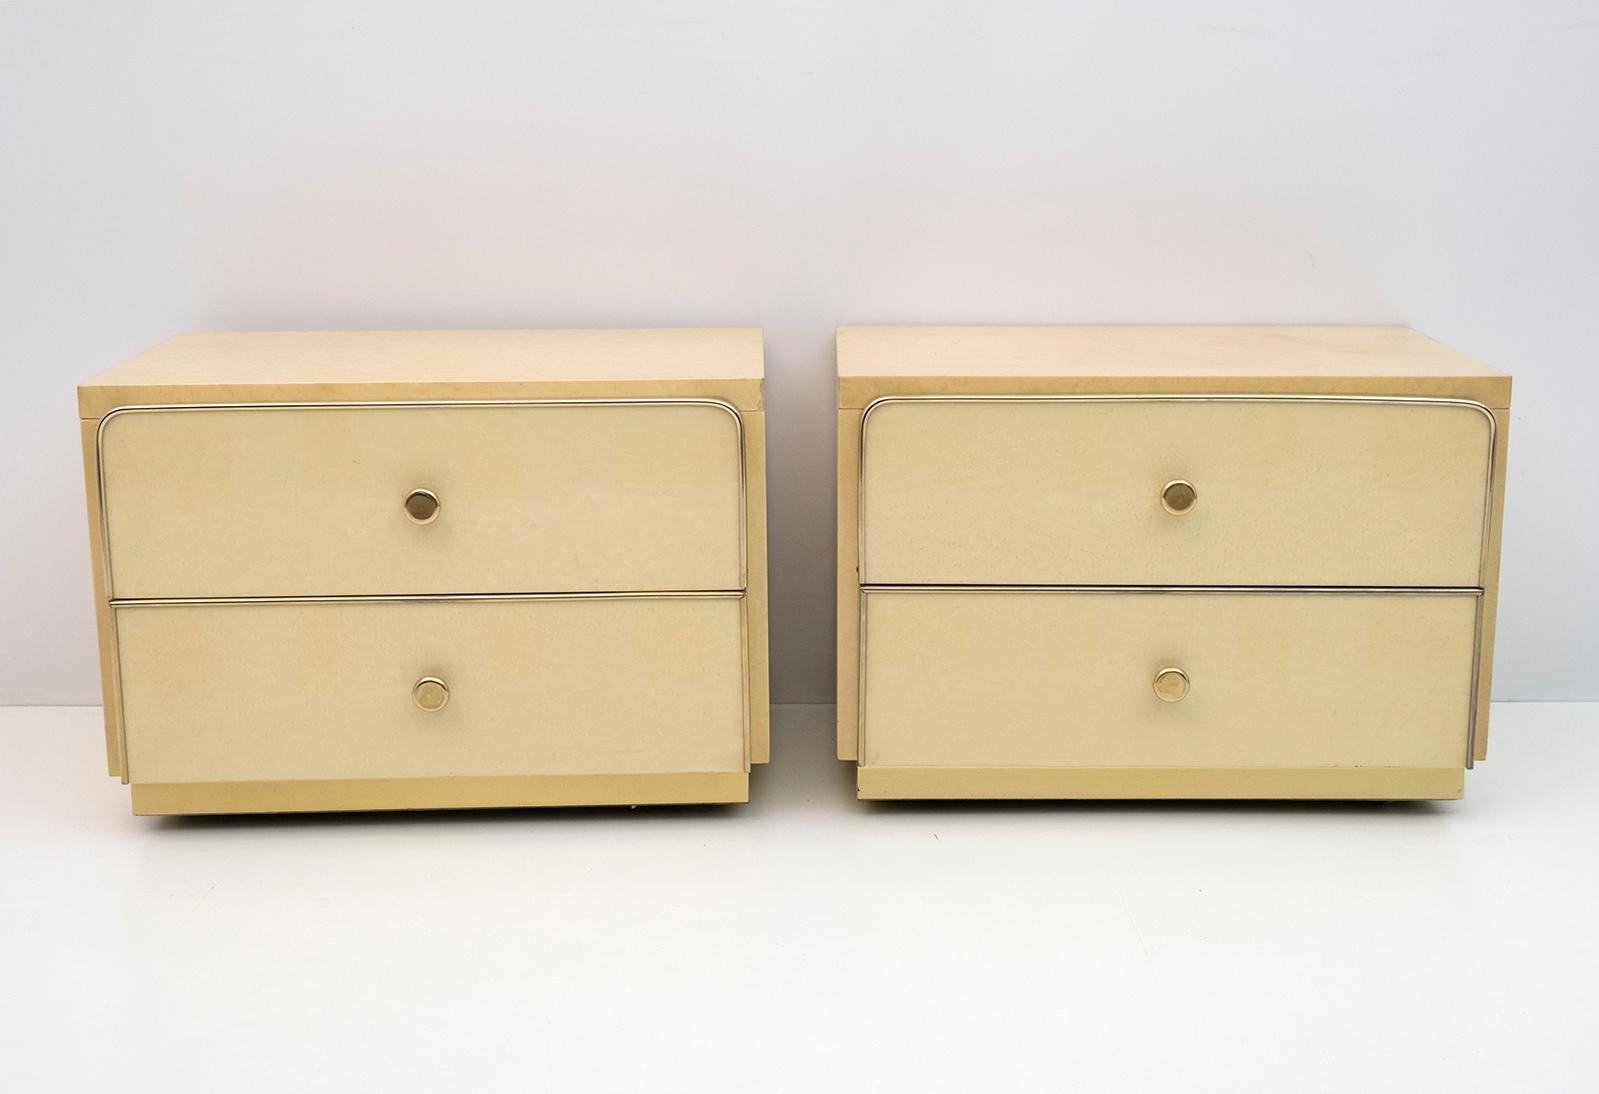 Beautiful pair of bedside tables of Italian manufacture in maple burl, the frames around the drawers and the band below are in brass and as feet they have retractable wheels, 1980s production, modernist design in the style of Willy Rizzo.